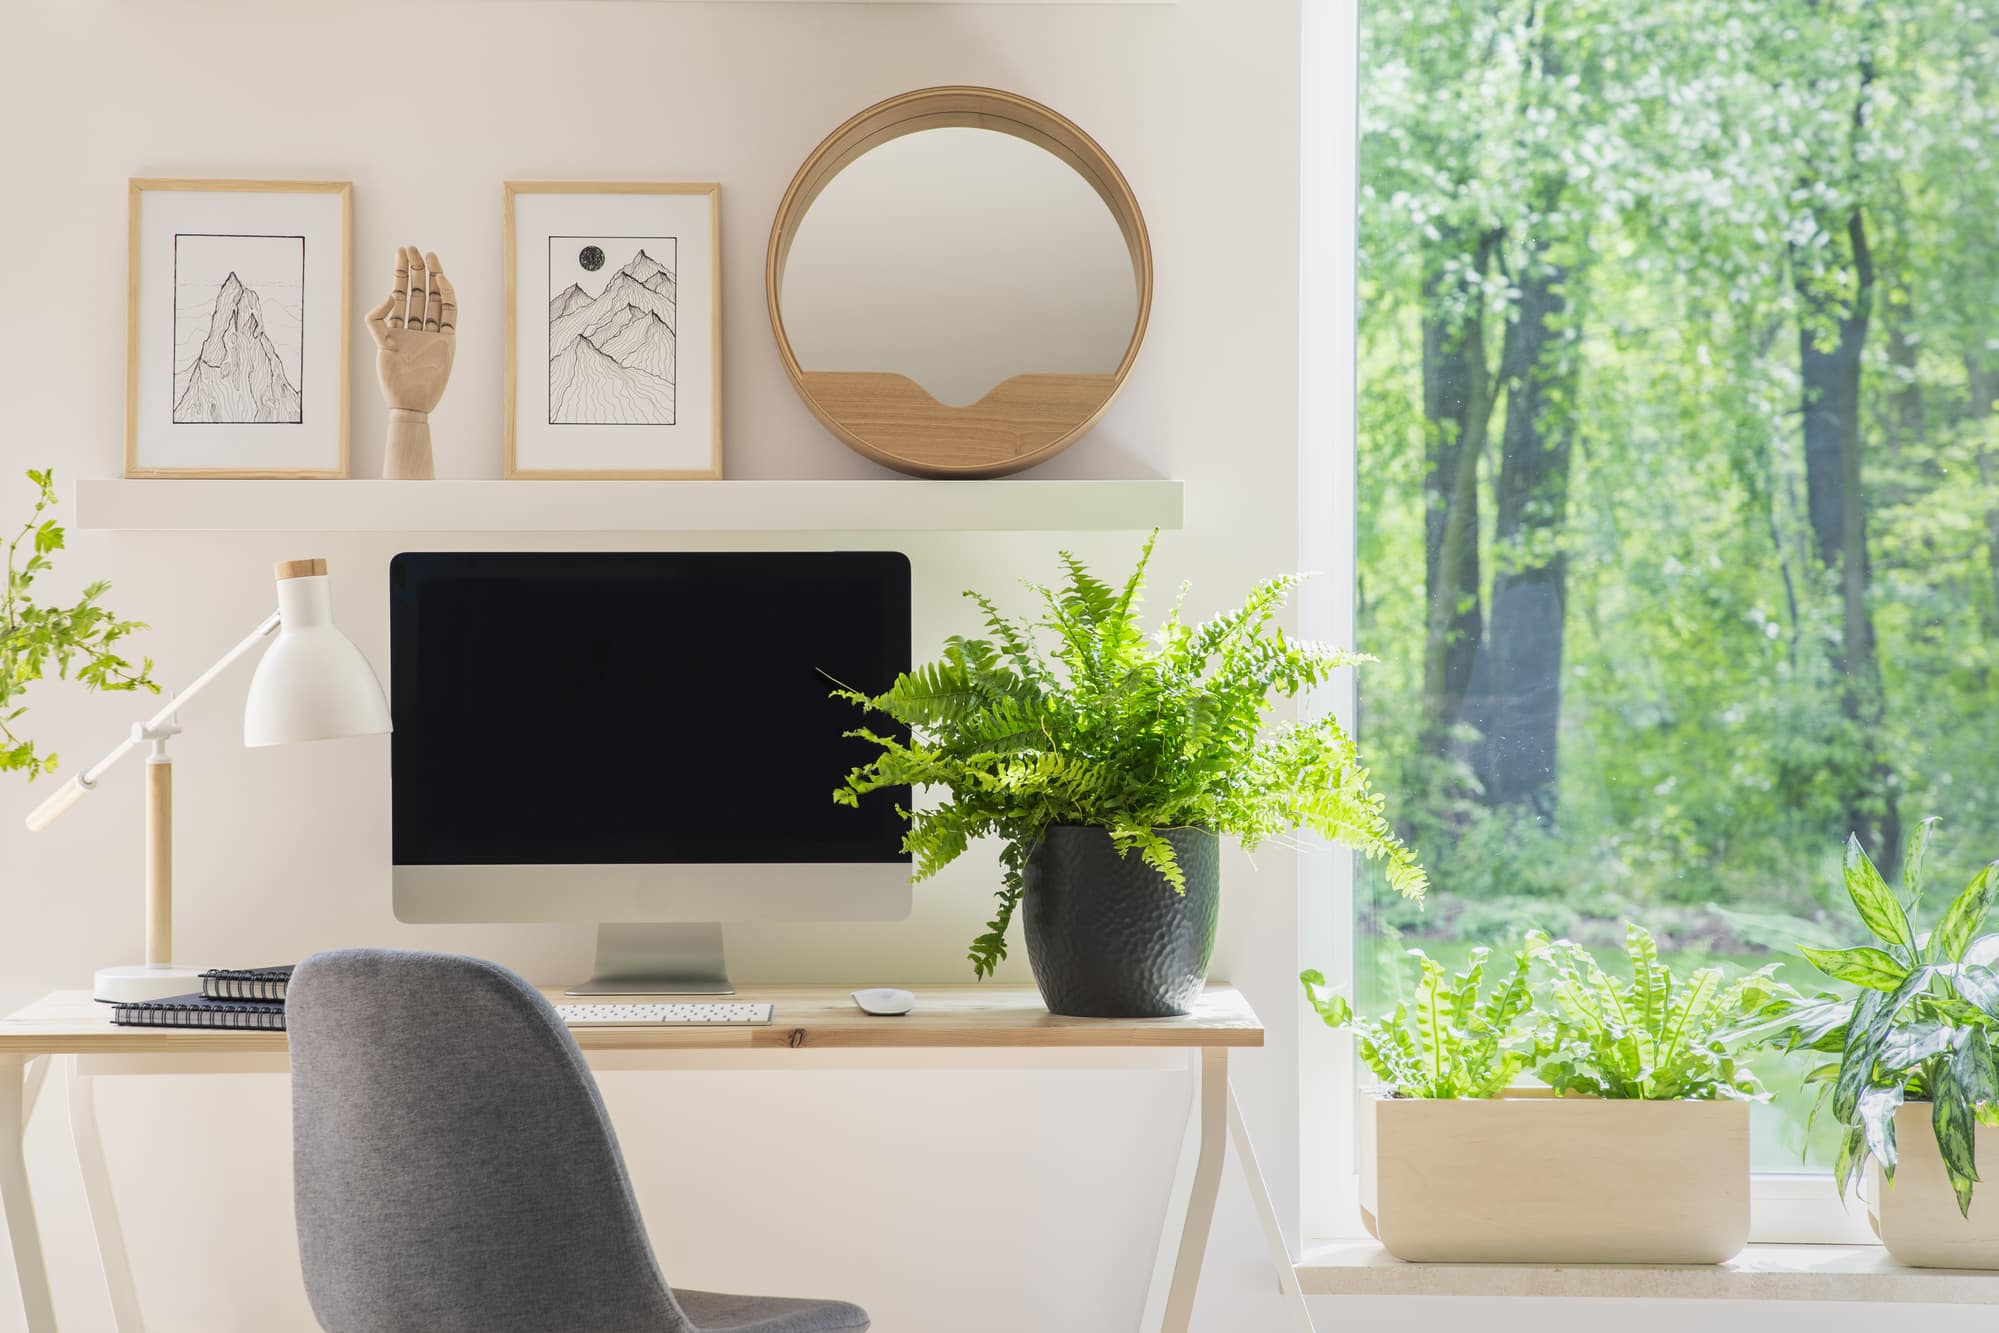 Grey chair at desk with plant in bright home office interior with window and posters. Real photo